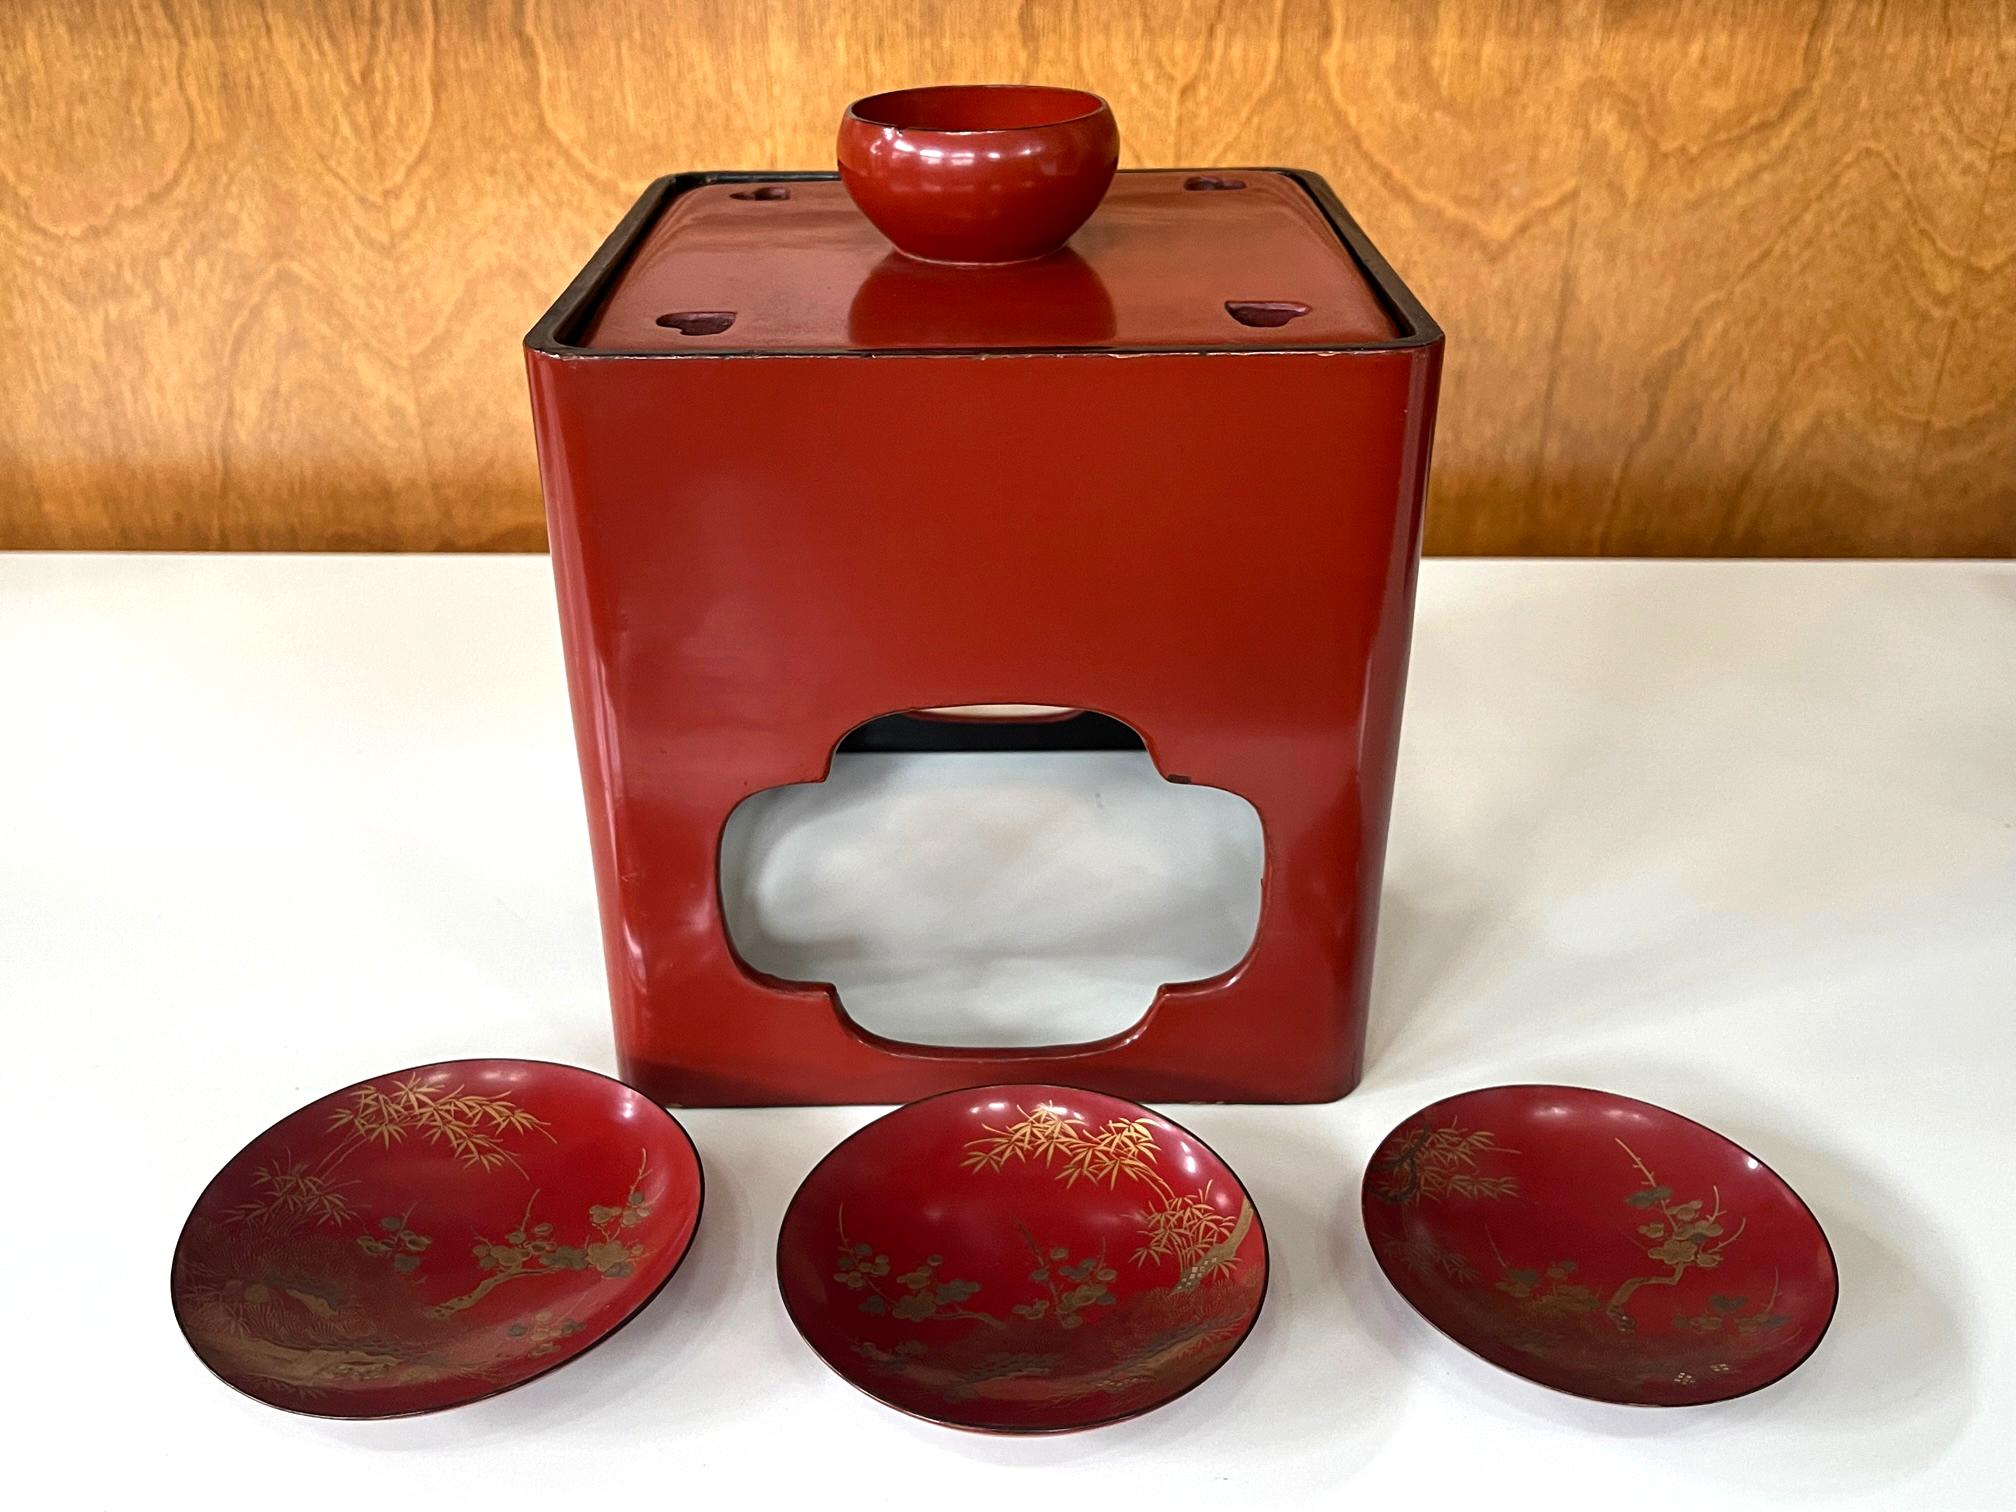 A Japanese lacquered Sake Drinking set circa late 19th century (end of Meiji period), The assemble consists of a red lacquer stand open frame support and a lid that encloses a storage space with black lacquered interior. The lid features a and a cup